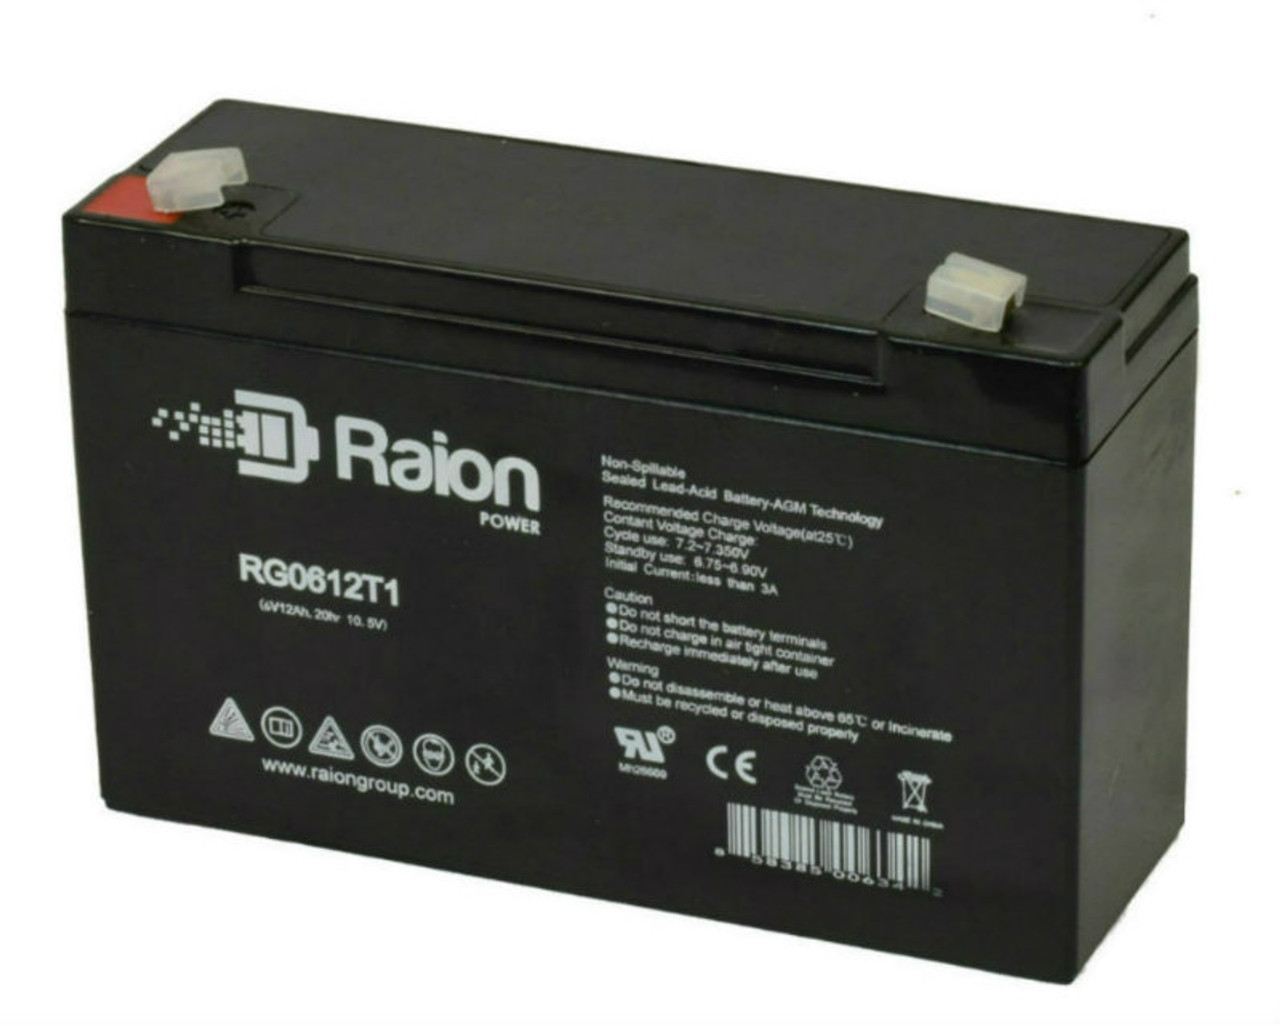 Raion Power RG06120T1 Replacement 6V 12Ah Emergency Light Battery for Chloride D2MF50